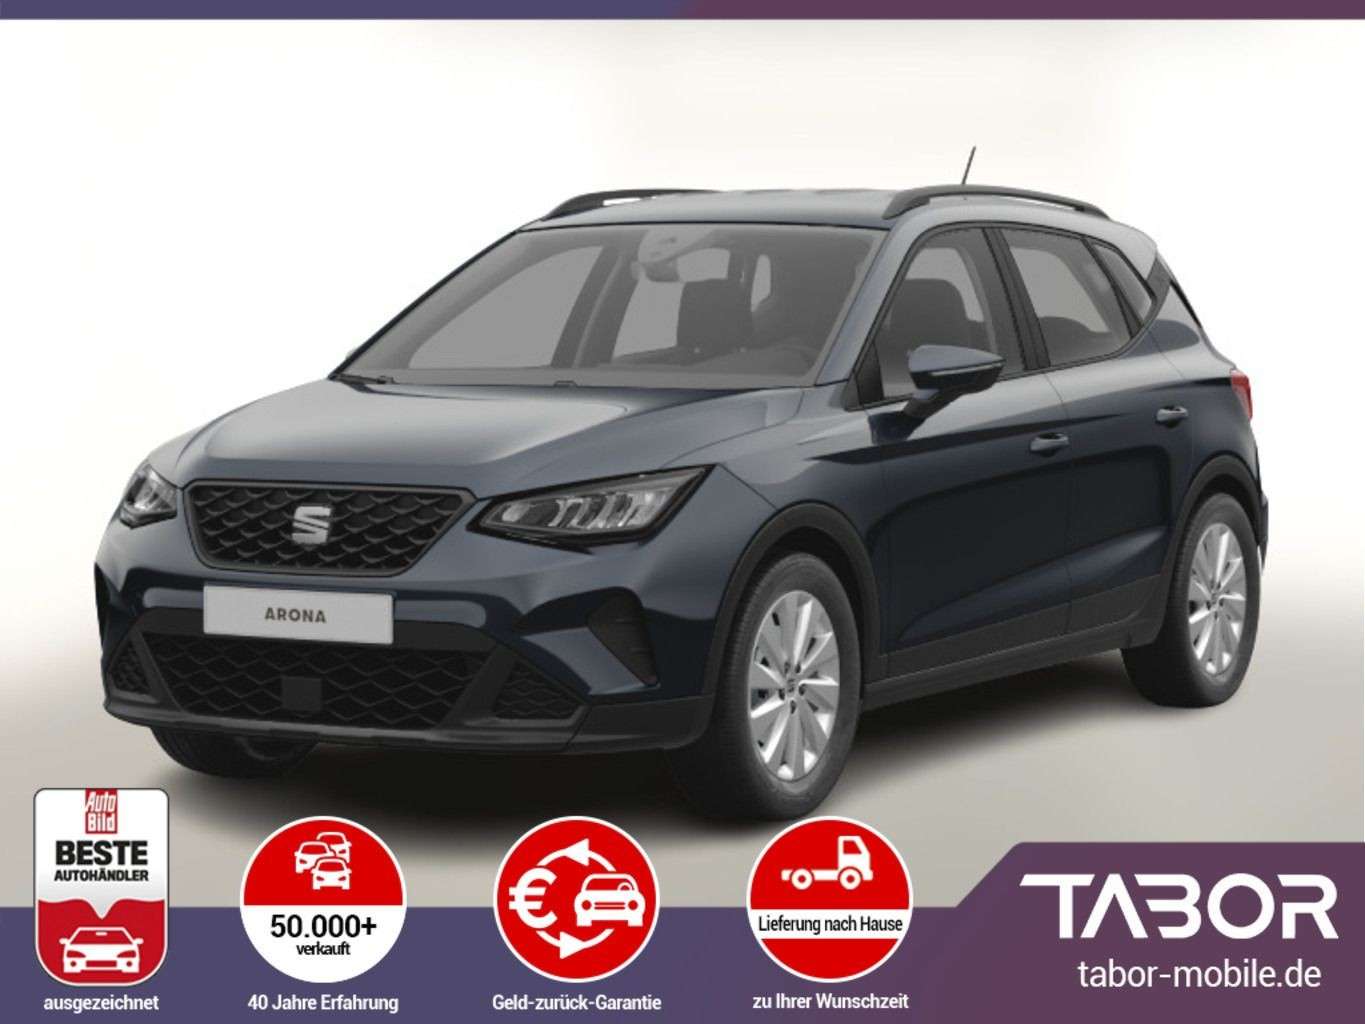 SEAT Arona Off-Road/Pick-up in Grey used in München for € 19,988.-